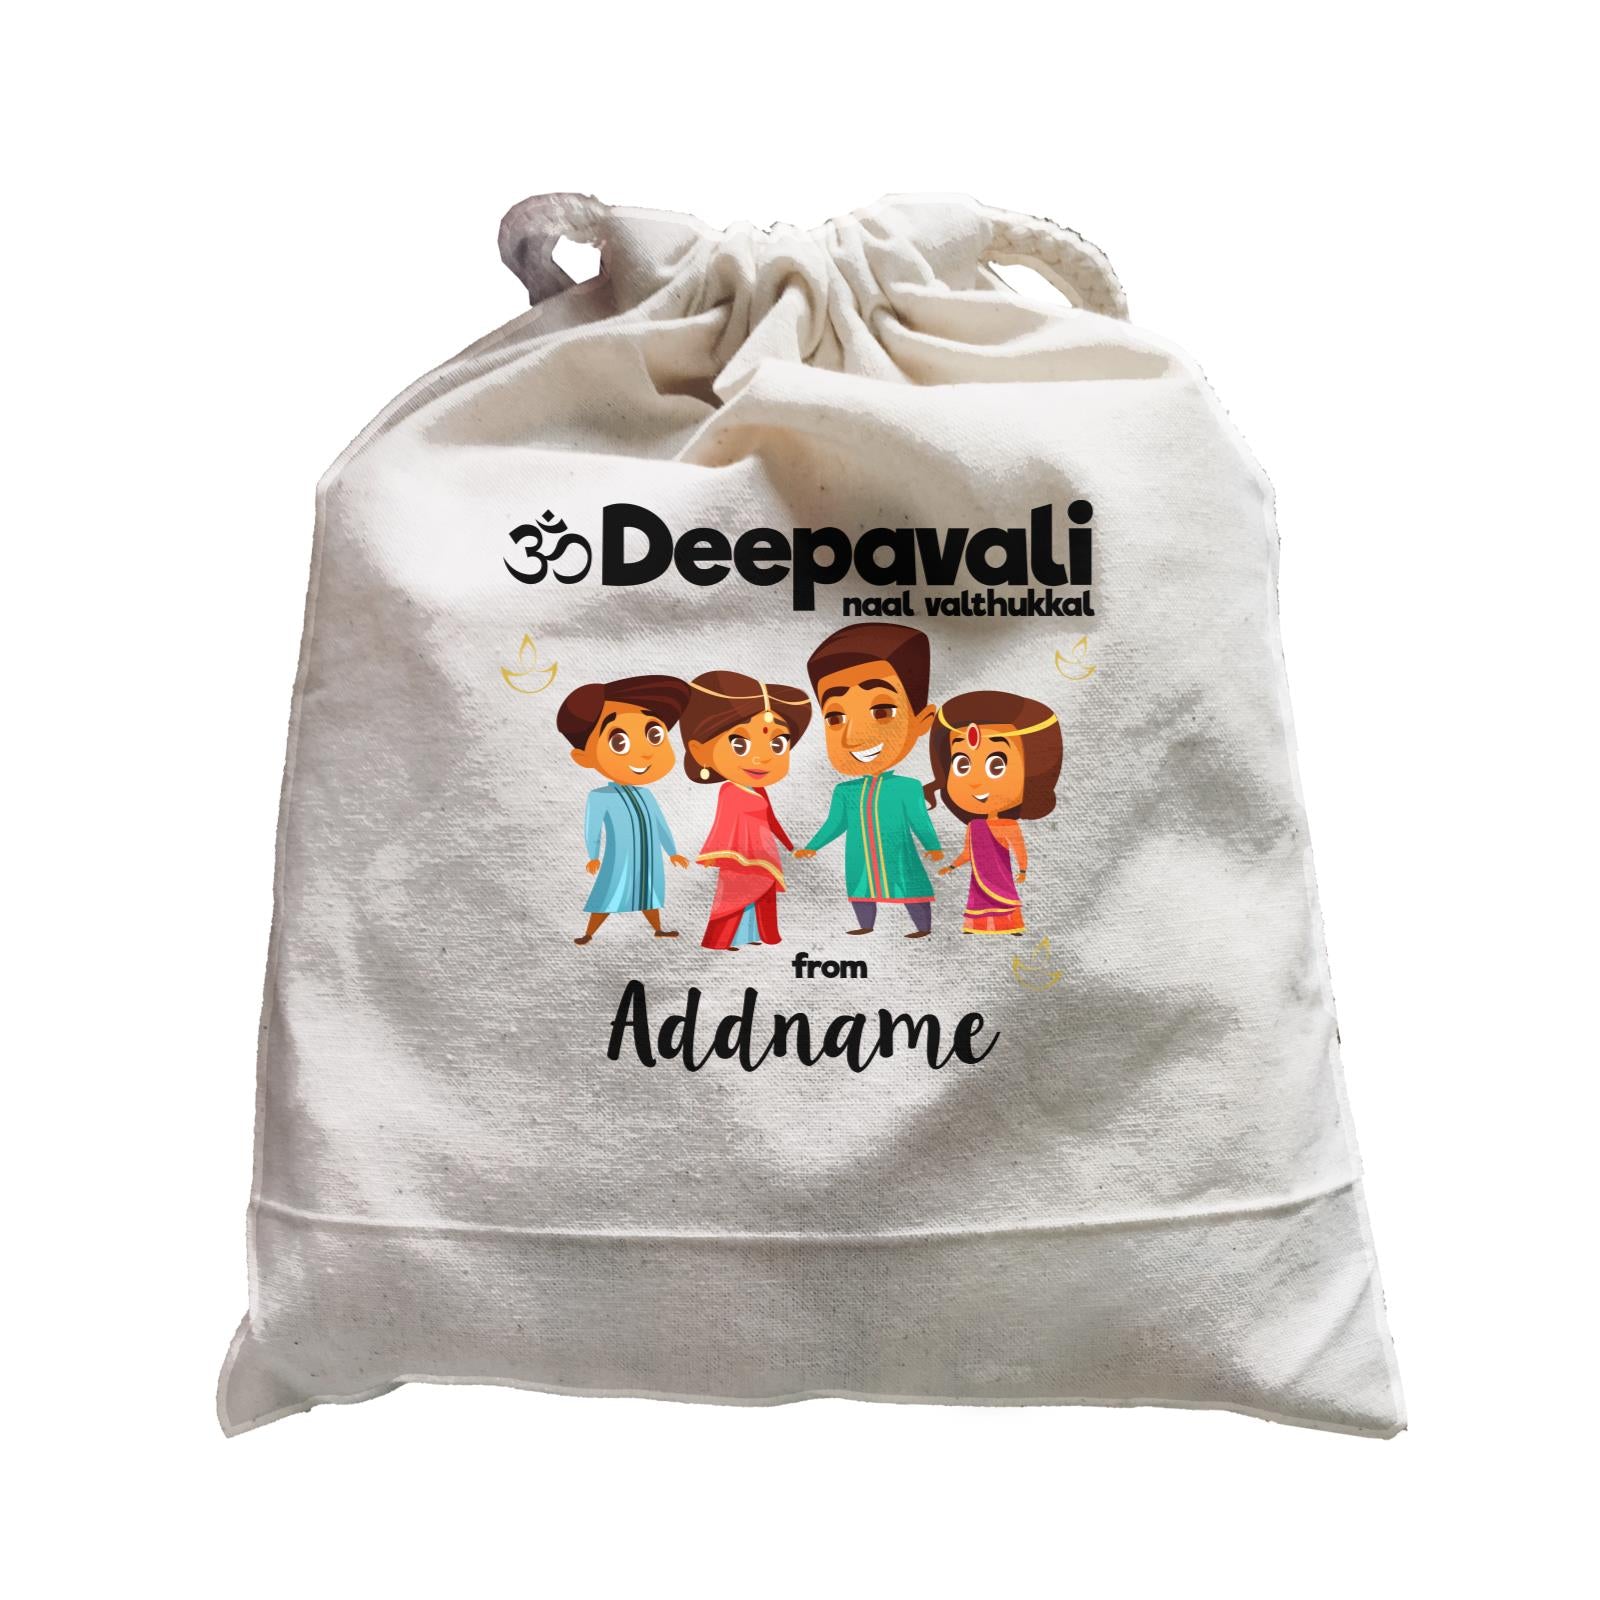 Cute Family Of Four OM Deepavali From Addname Satchel